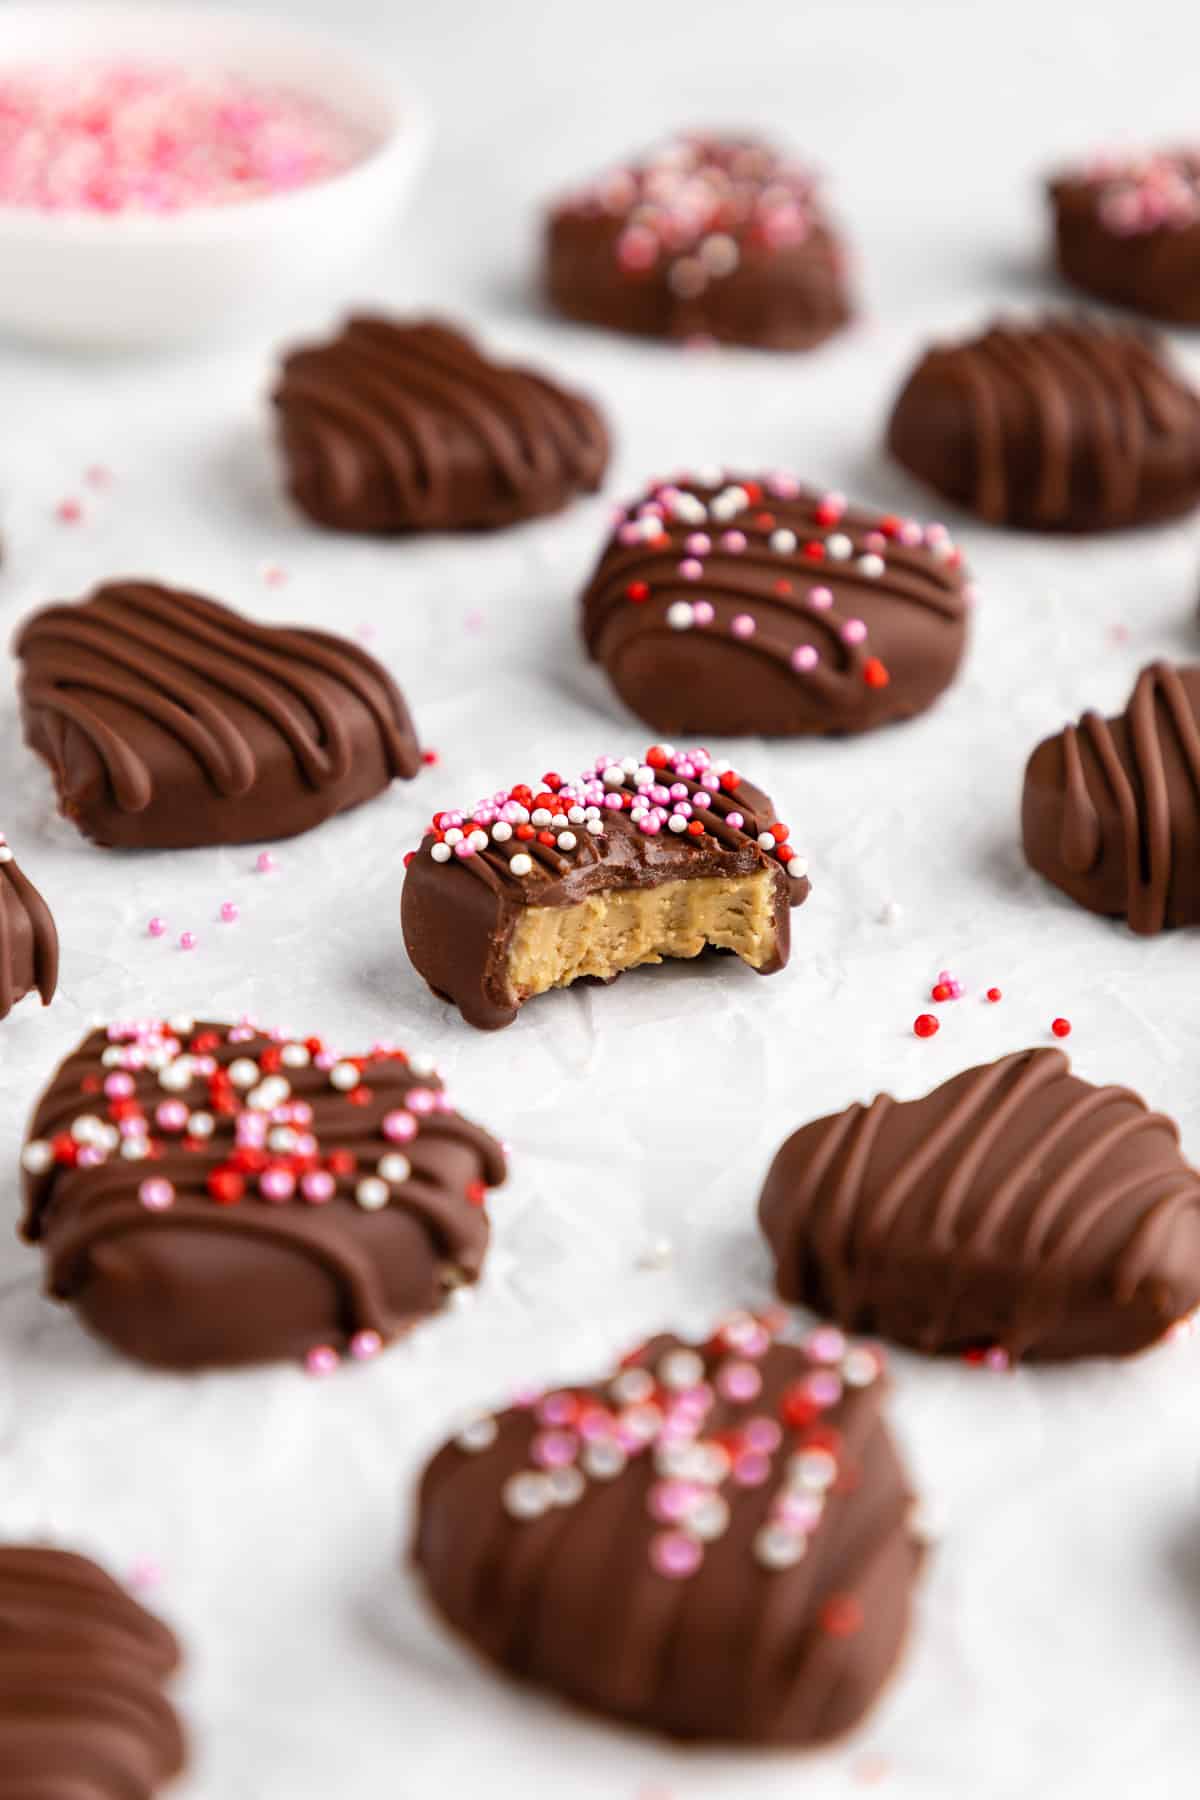 chocolate covered sunbutter hearts with a bite taken out of the center one